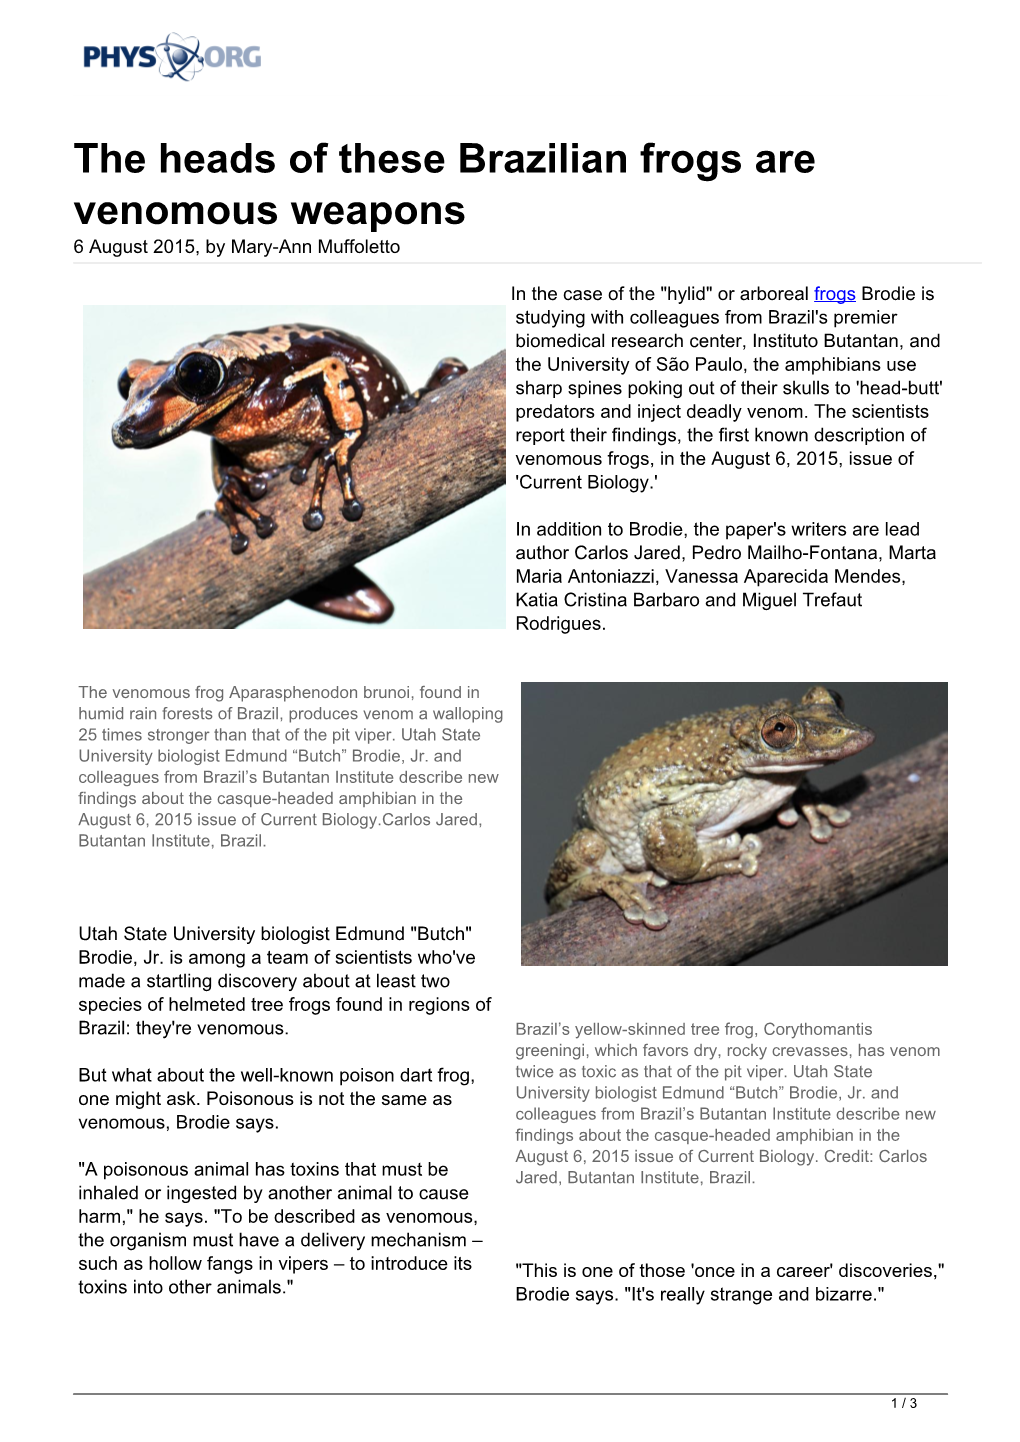 The Heads of These Brazilian Frogs Are Venomous Weapons 6 August 2015, by Mary-Ann Muffoletto